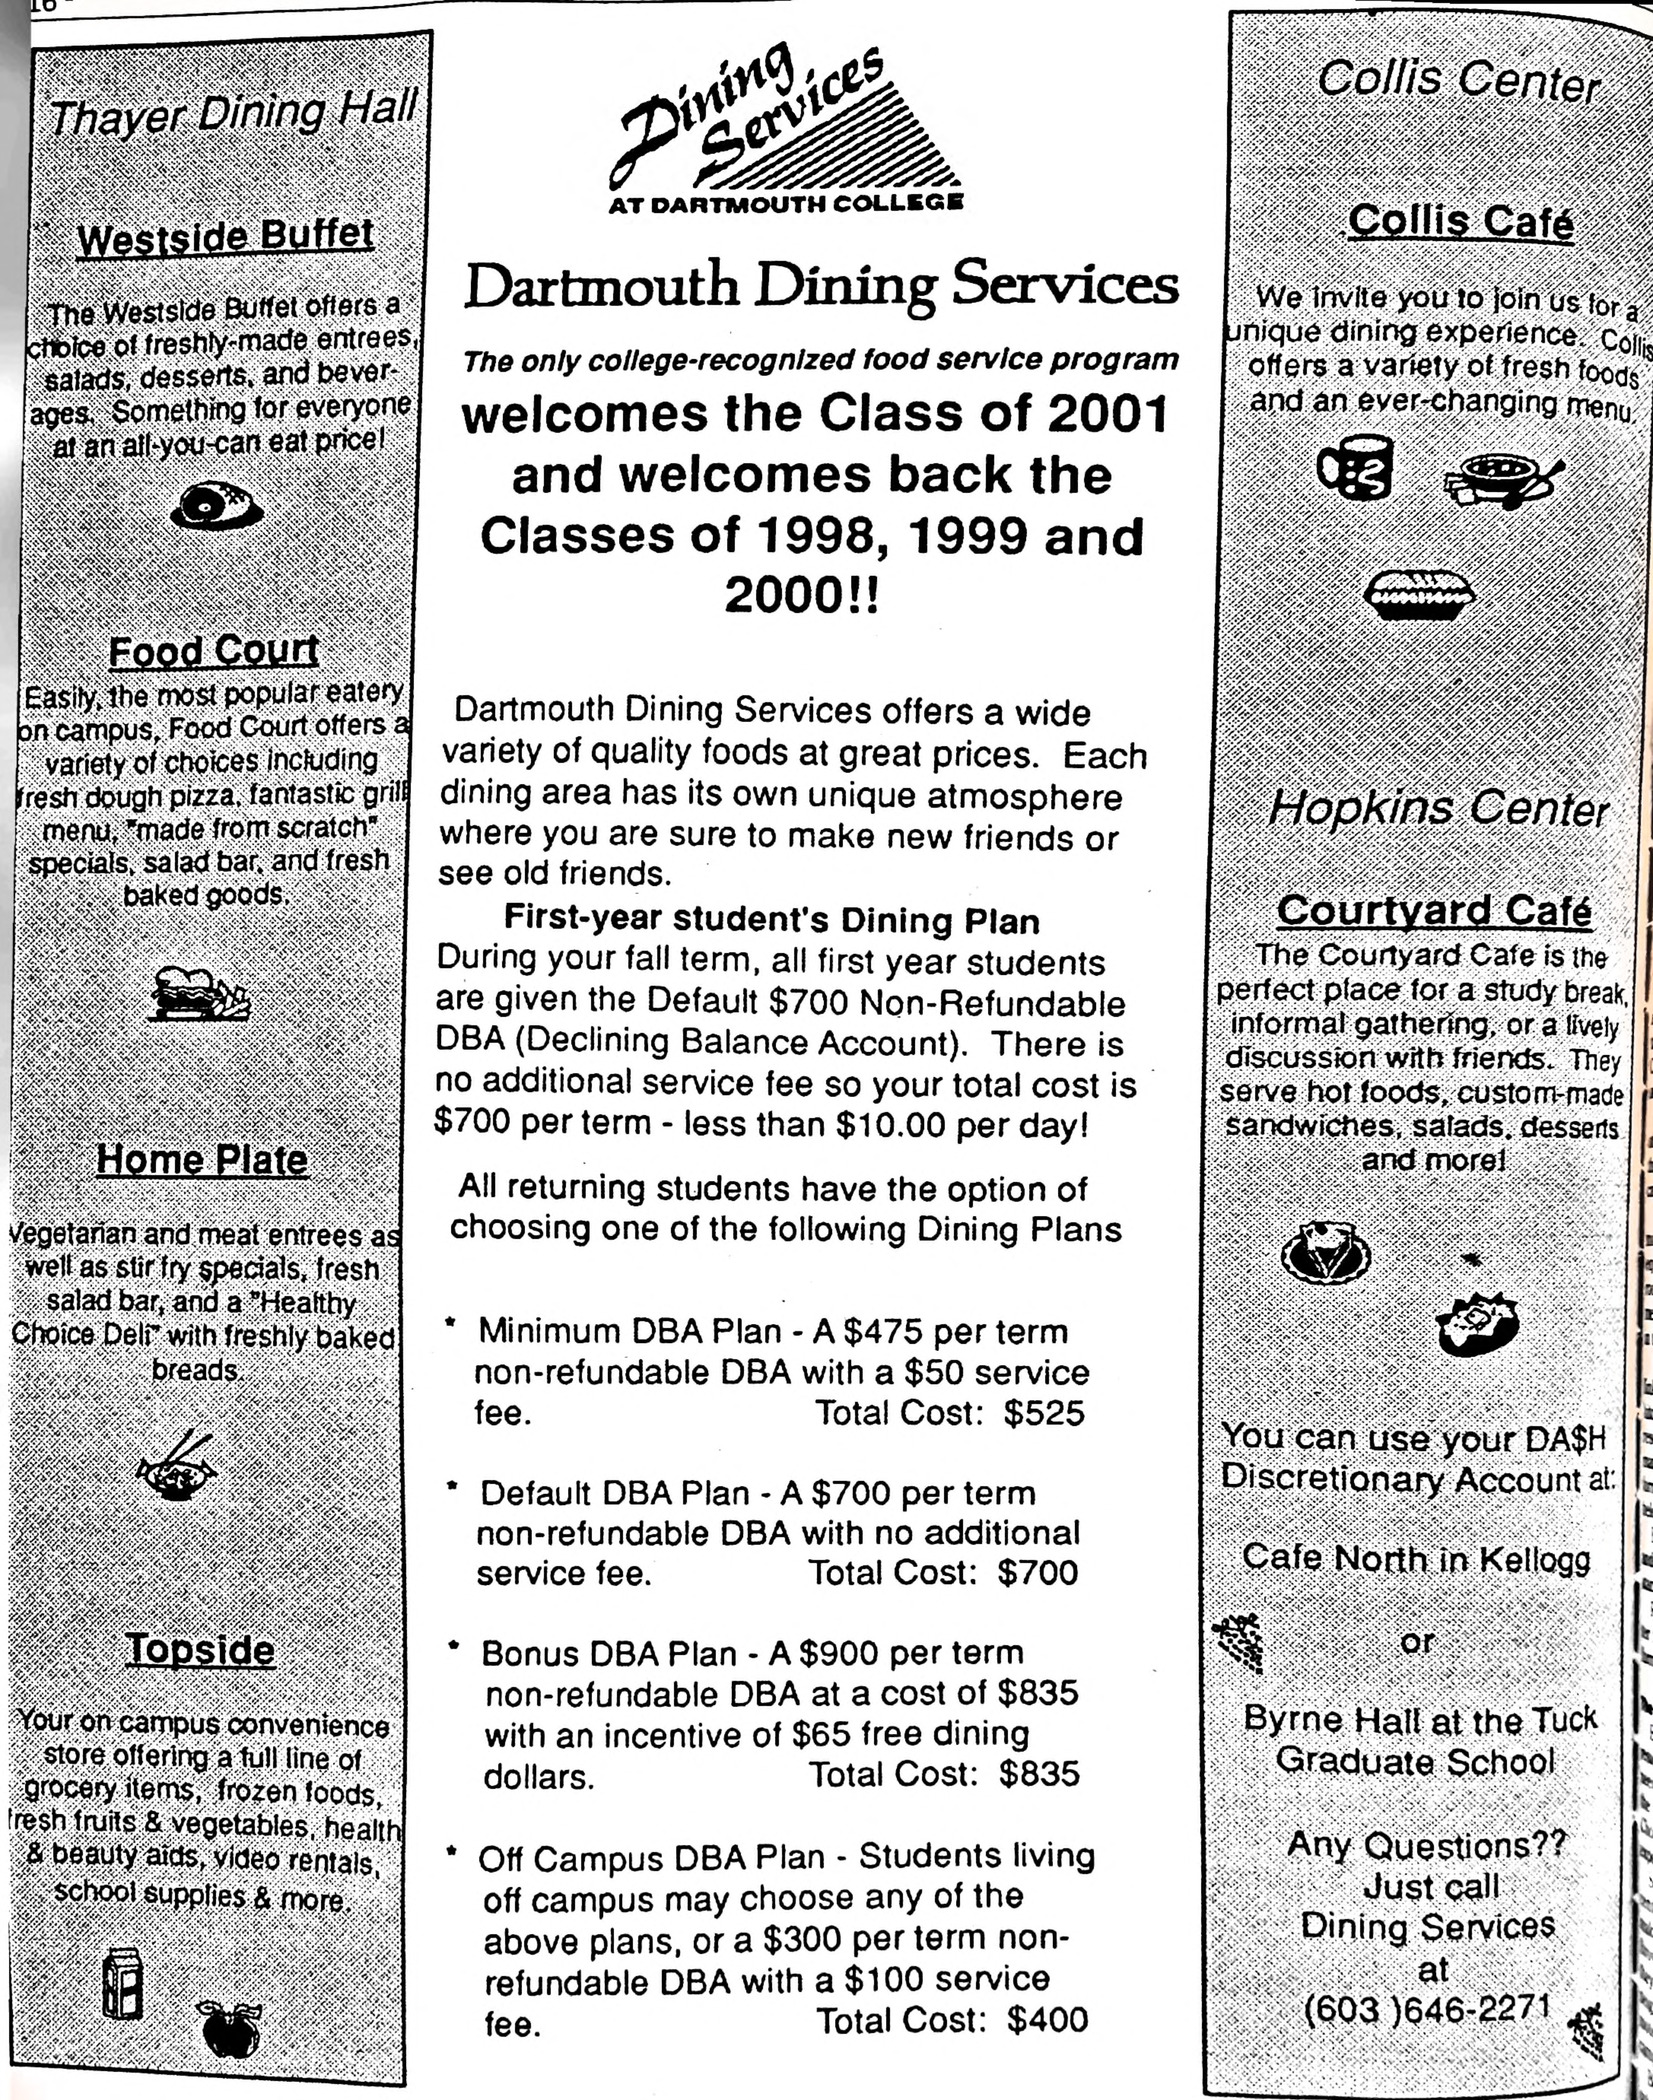 Dartmouth Dining Services 1997 Meal Plan Advertisement